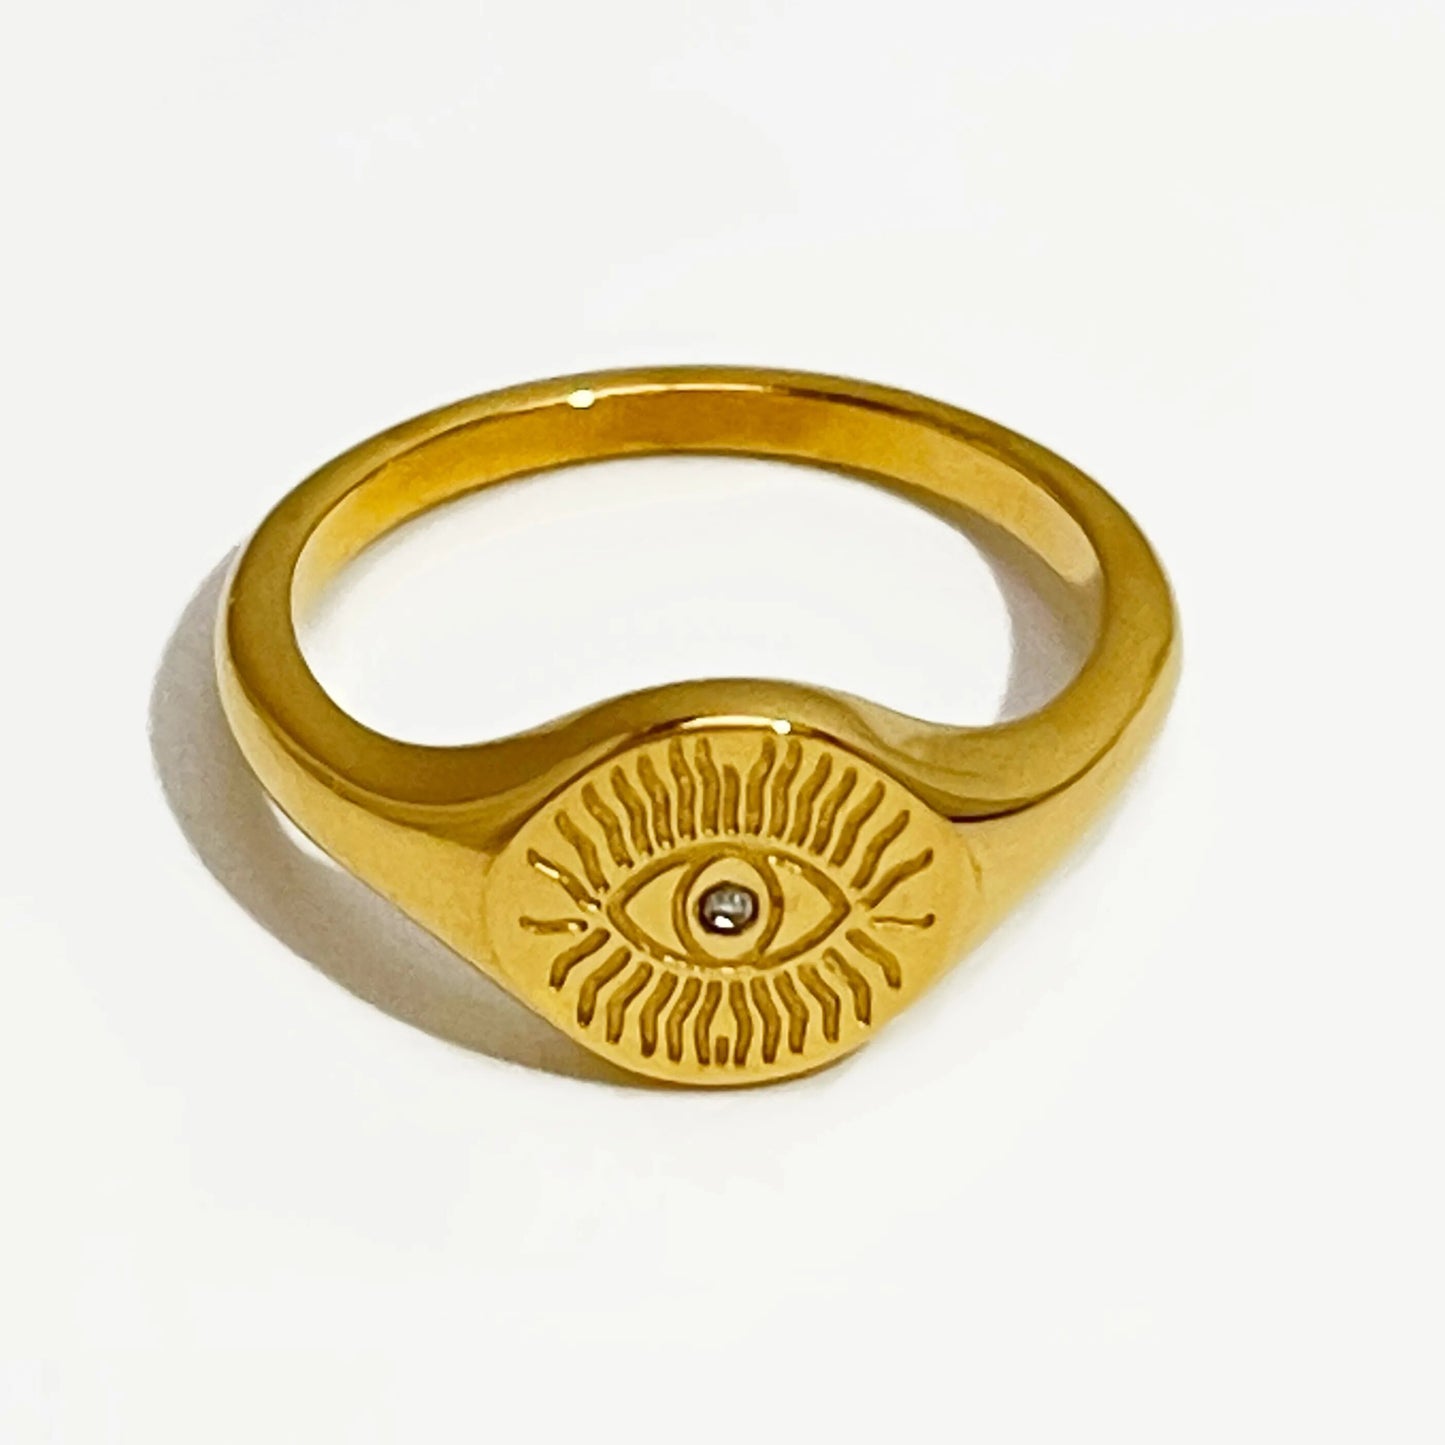 HARRIS RING 18K Gold Plated